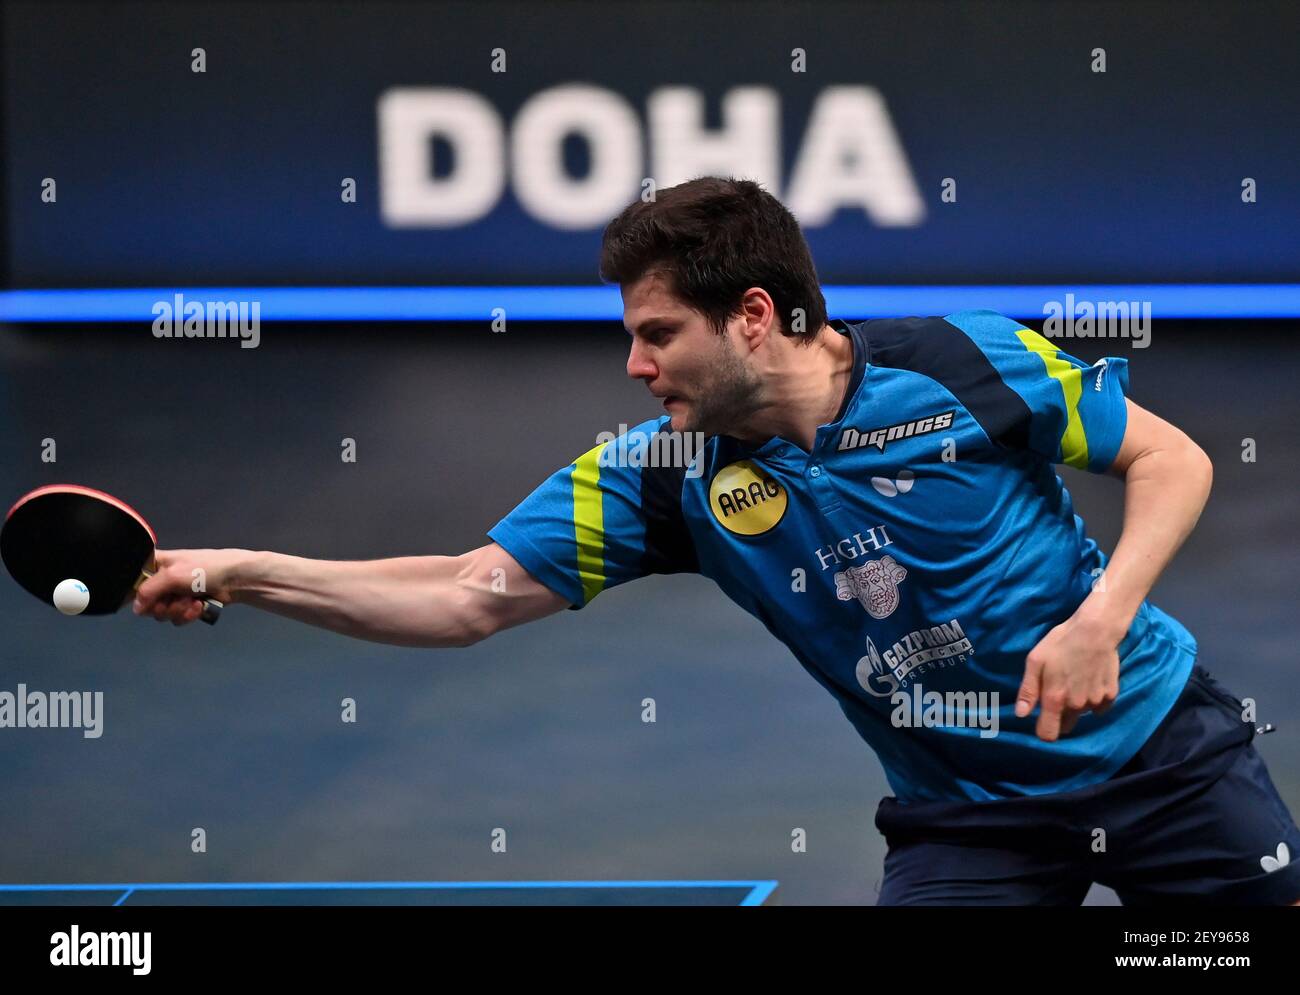 Doha. 5th Mar, 2021. Dimitrij Ovtcharov of Germany returns the ball during the men's singles quarterfinal against Mattias Falck of Sweden at WTT Contender Doha in Doha, Qatar on March 5, 2021. Credit: Nikku/Xinhua/Alamy Live News Stock Photo